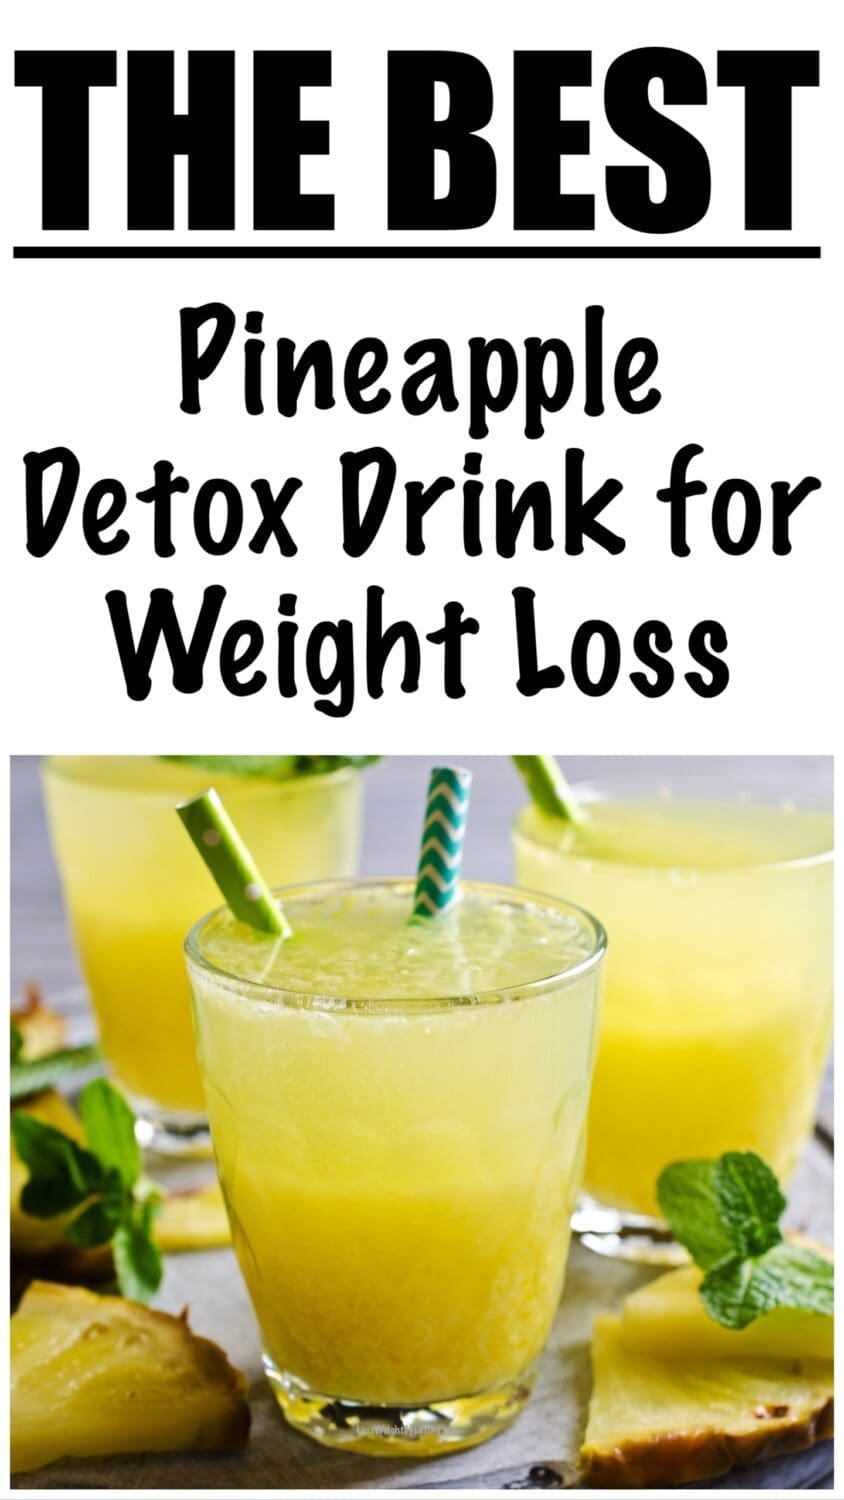 Pineapple Detox Drink for Weight Loss